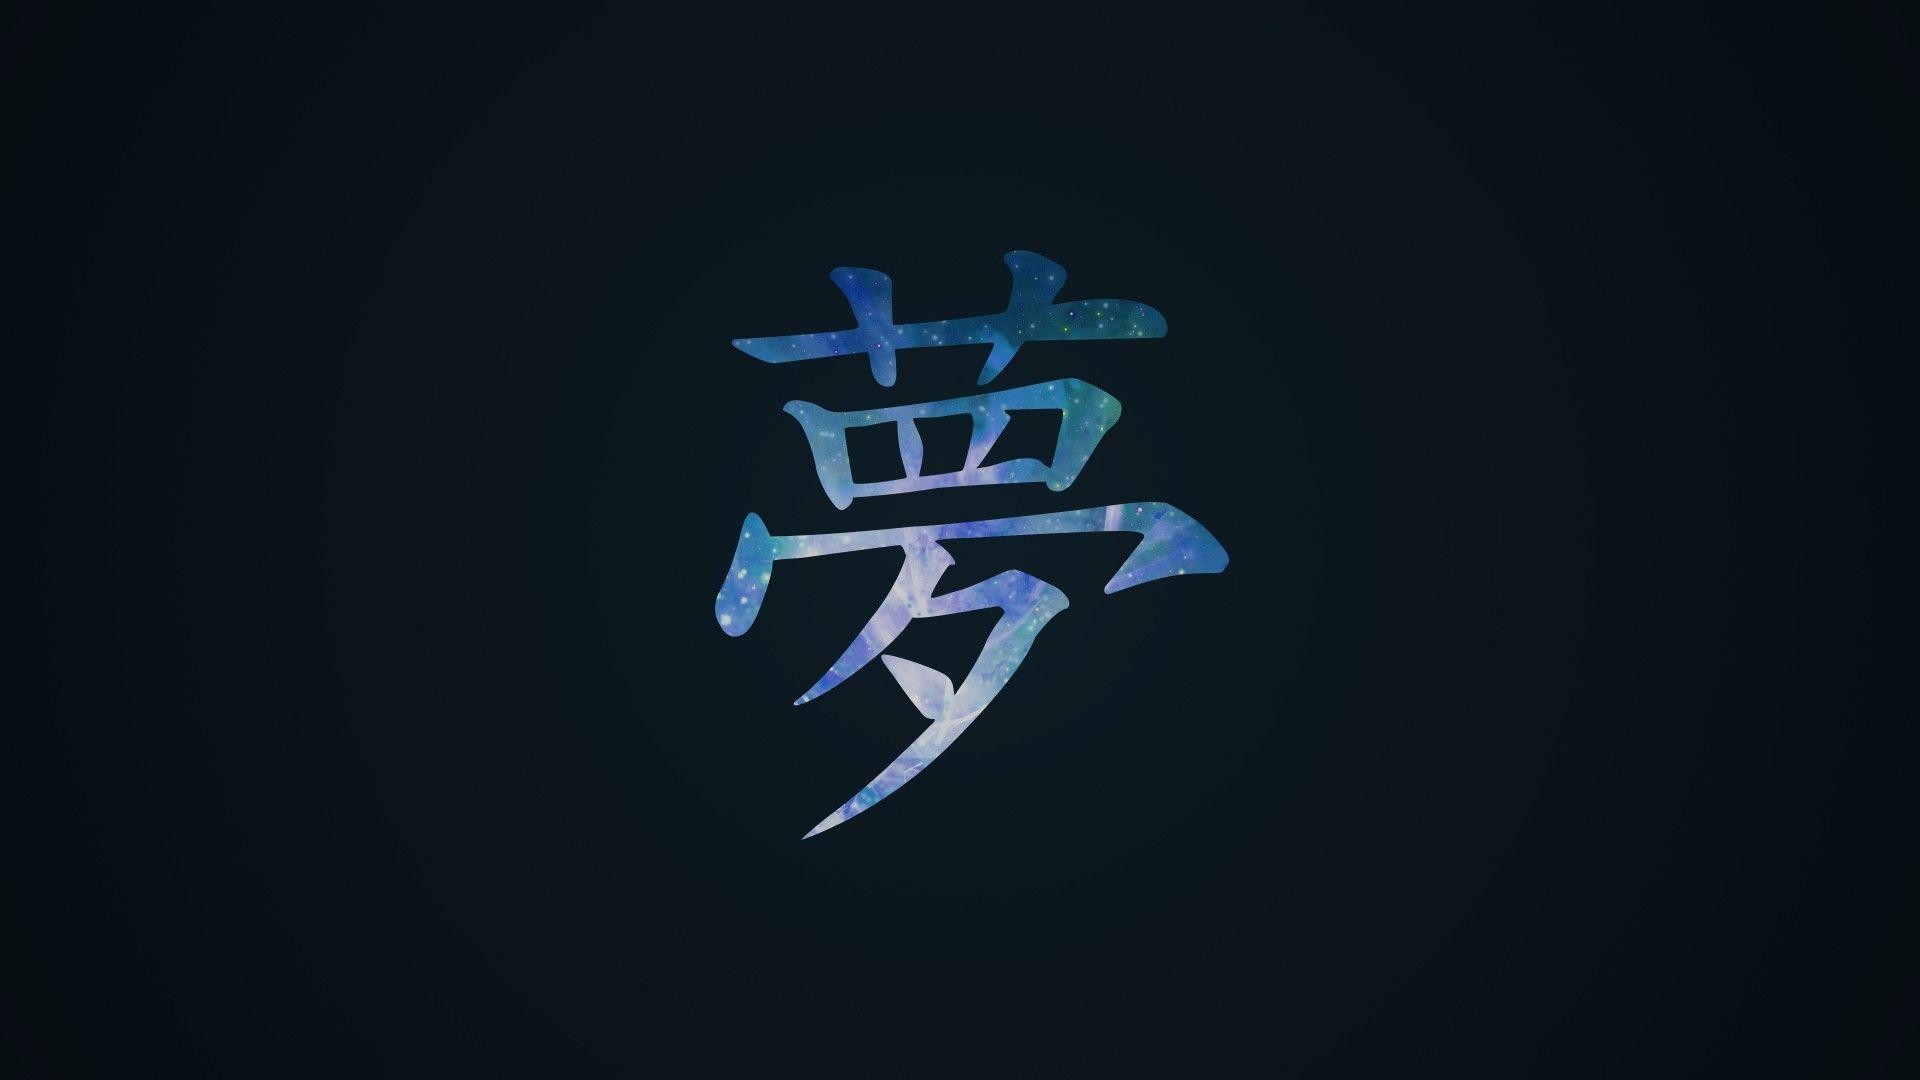 chinese symbol wallpaper,font,logo,text,electric blue,graphic design